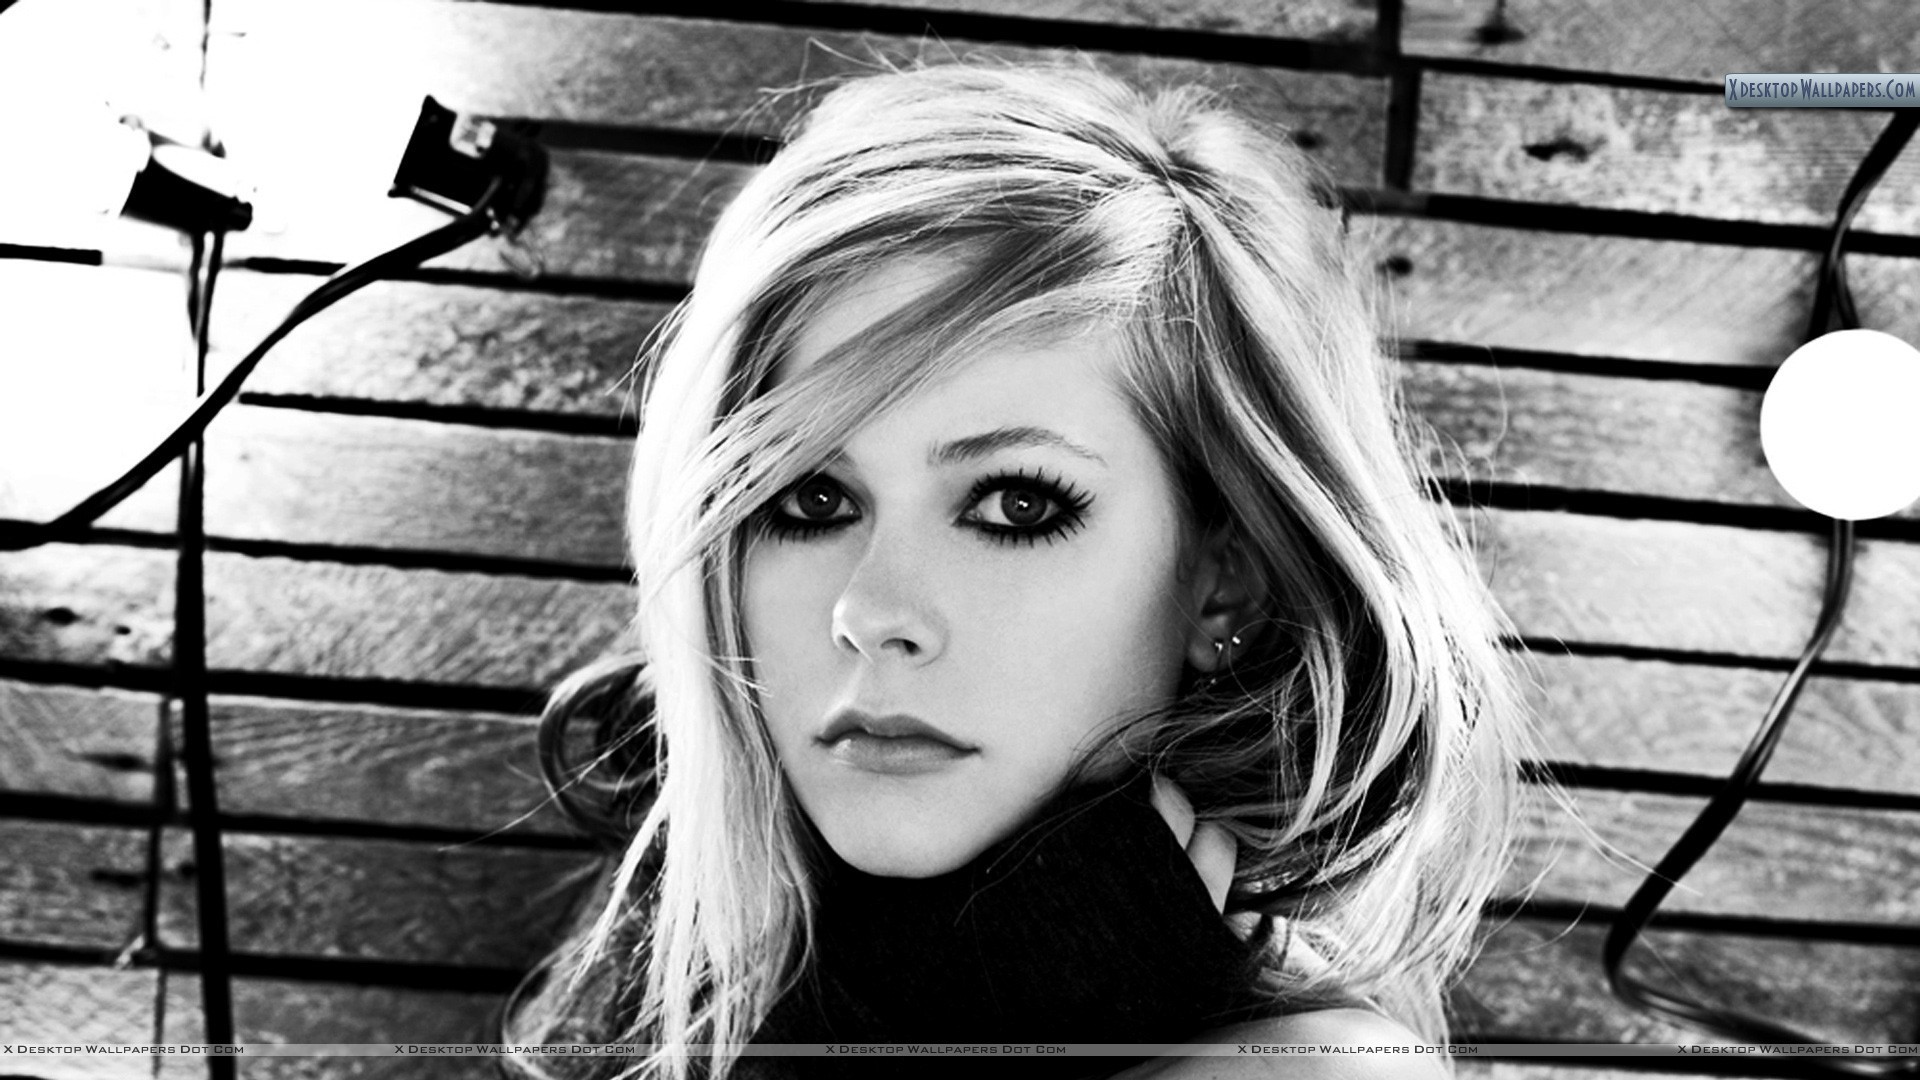 1920x1080 You are viewing wallpaper titled "Avril Lavigne Black & White Cute ...